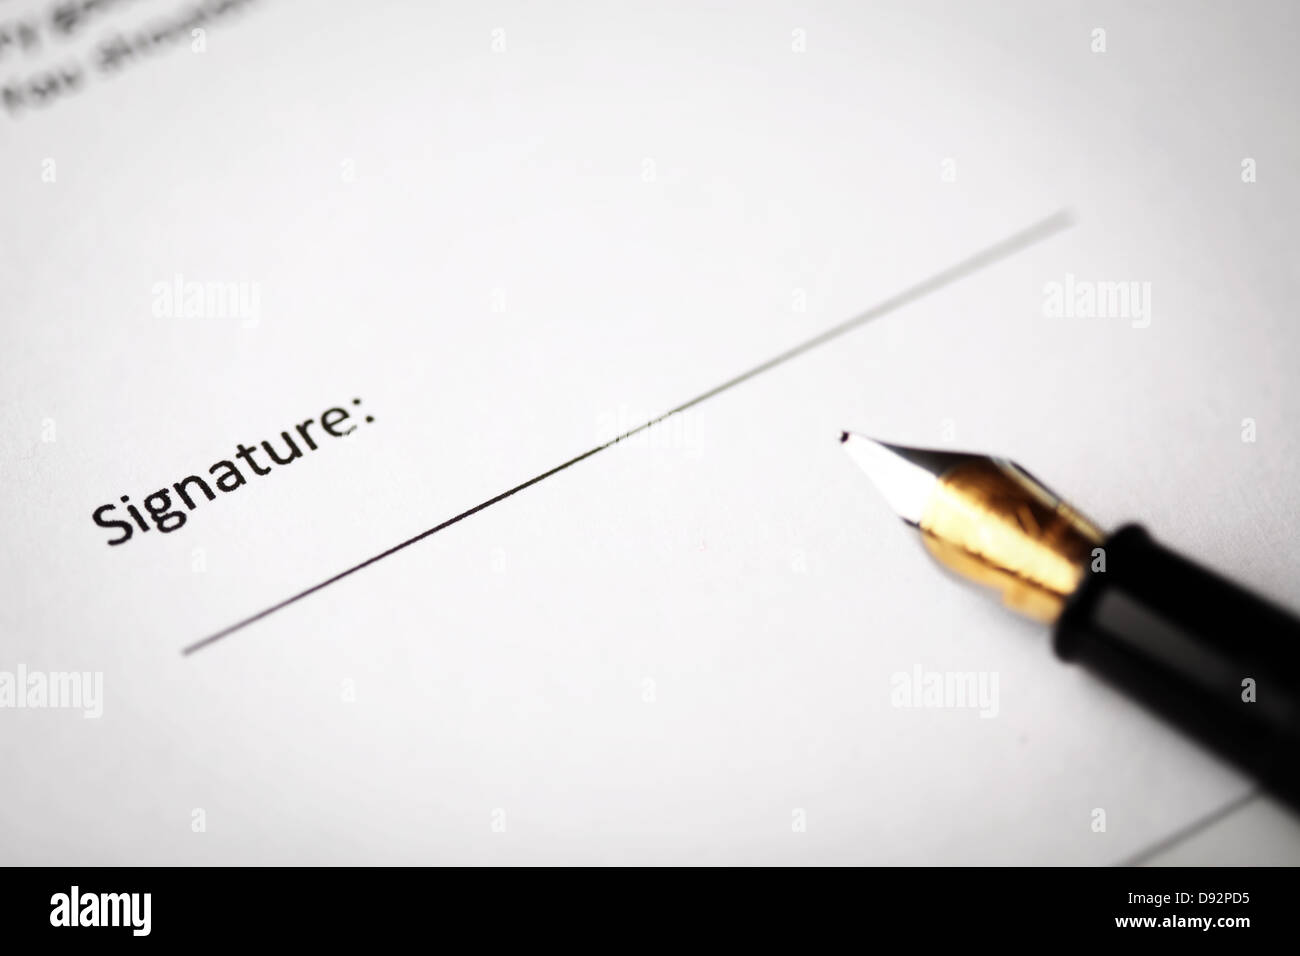 Signature part of a document Stock Photo